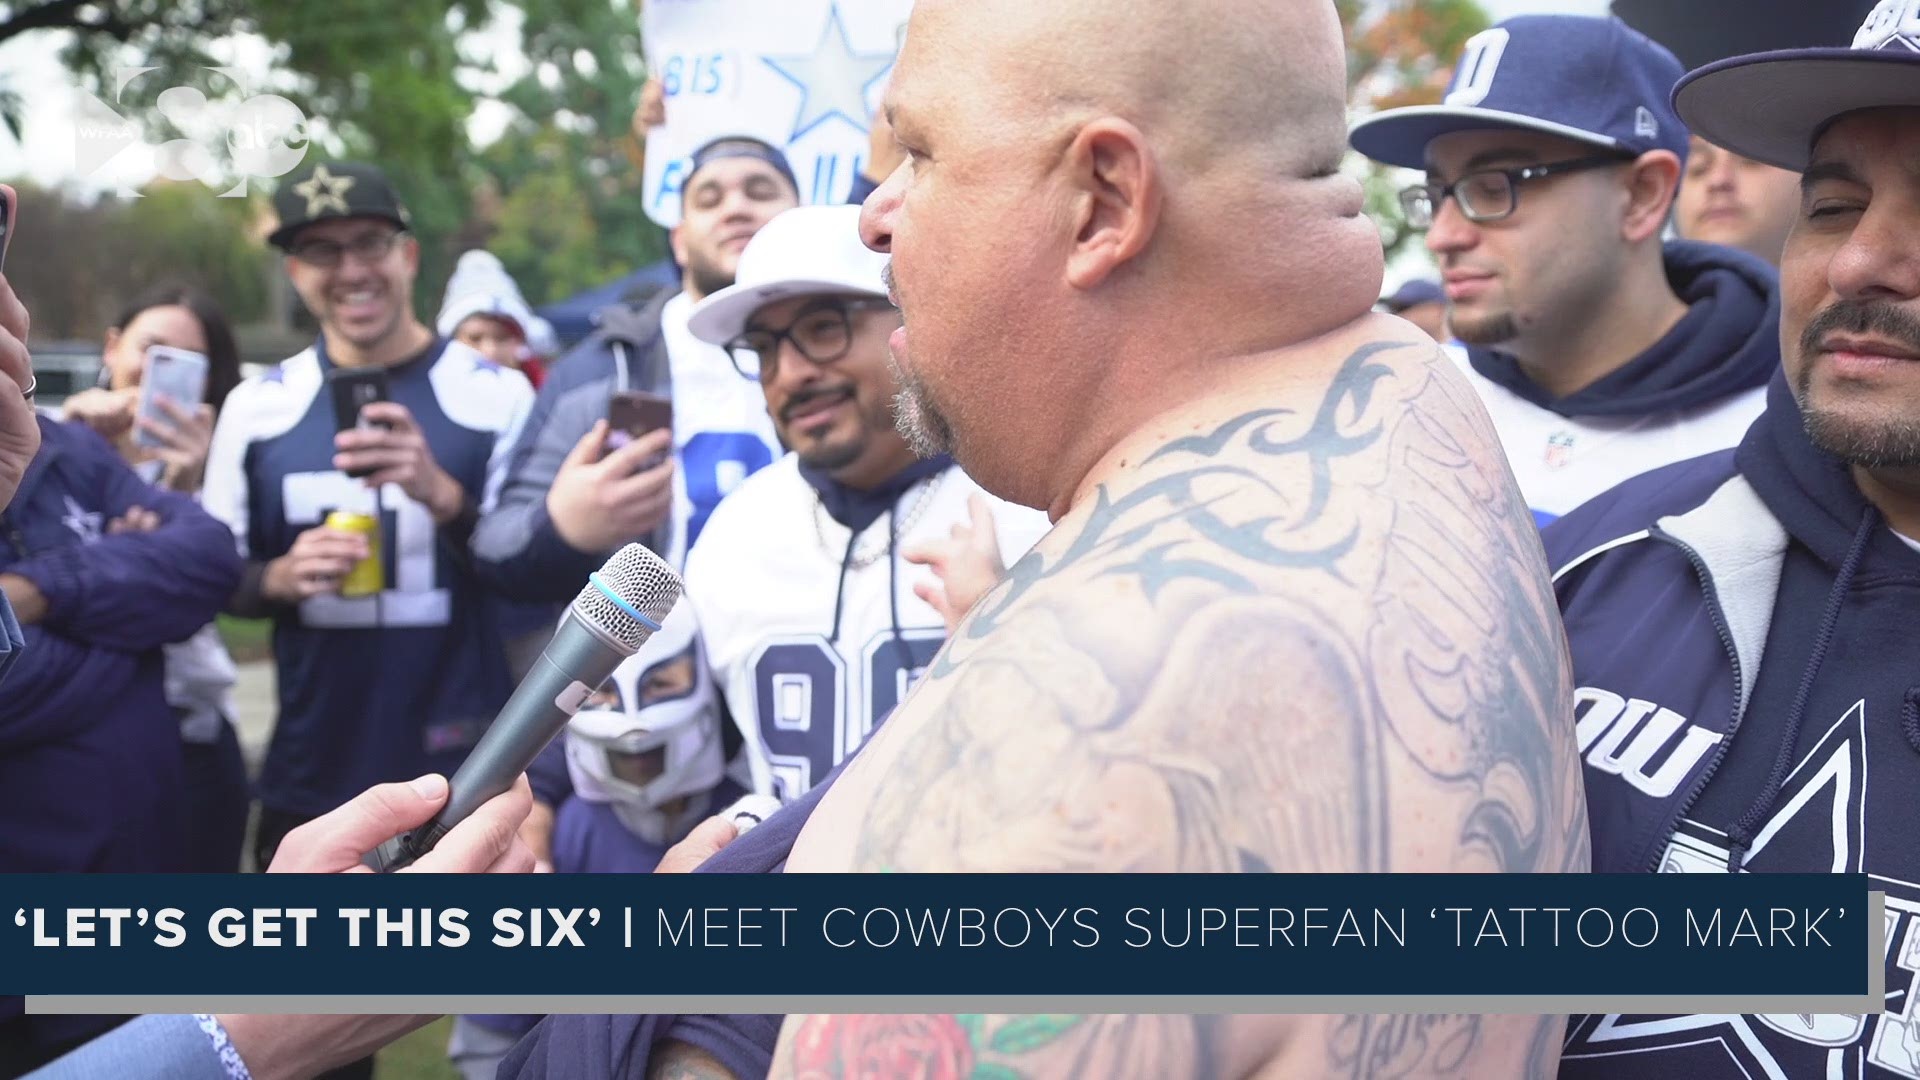 When it comes to Cowboys fans, there's dedication...then there's tattooing your whole body with tributes to the team. Meet "Tattoo Mark" with the SCDCFC.